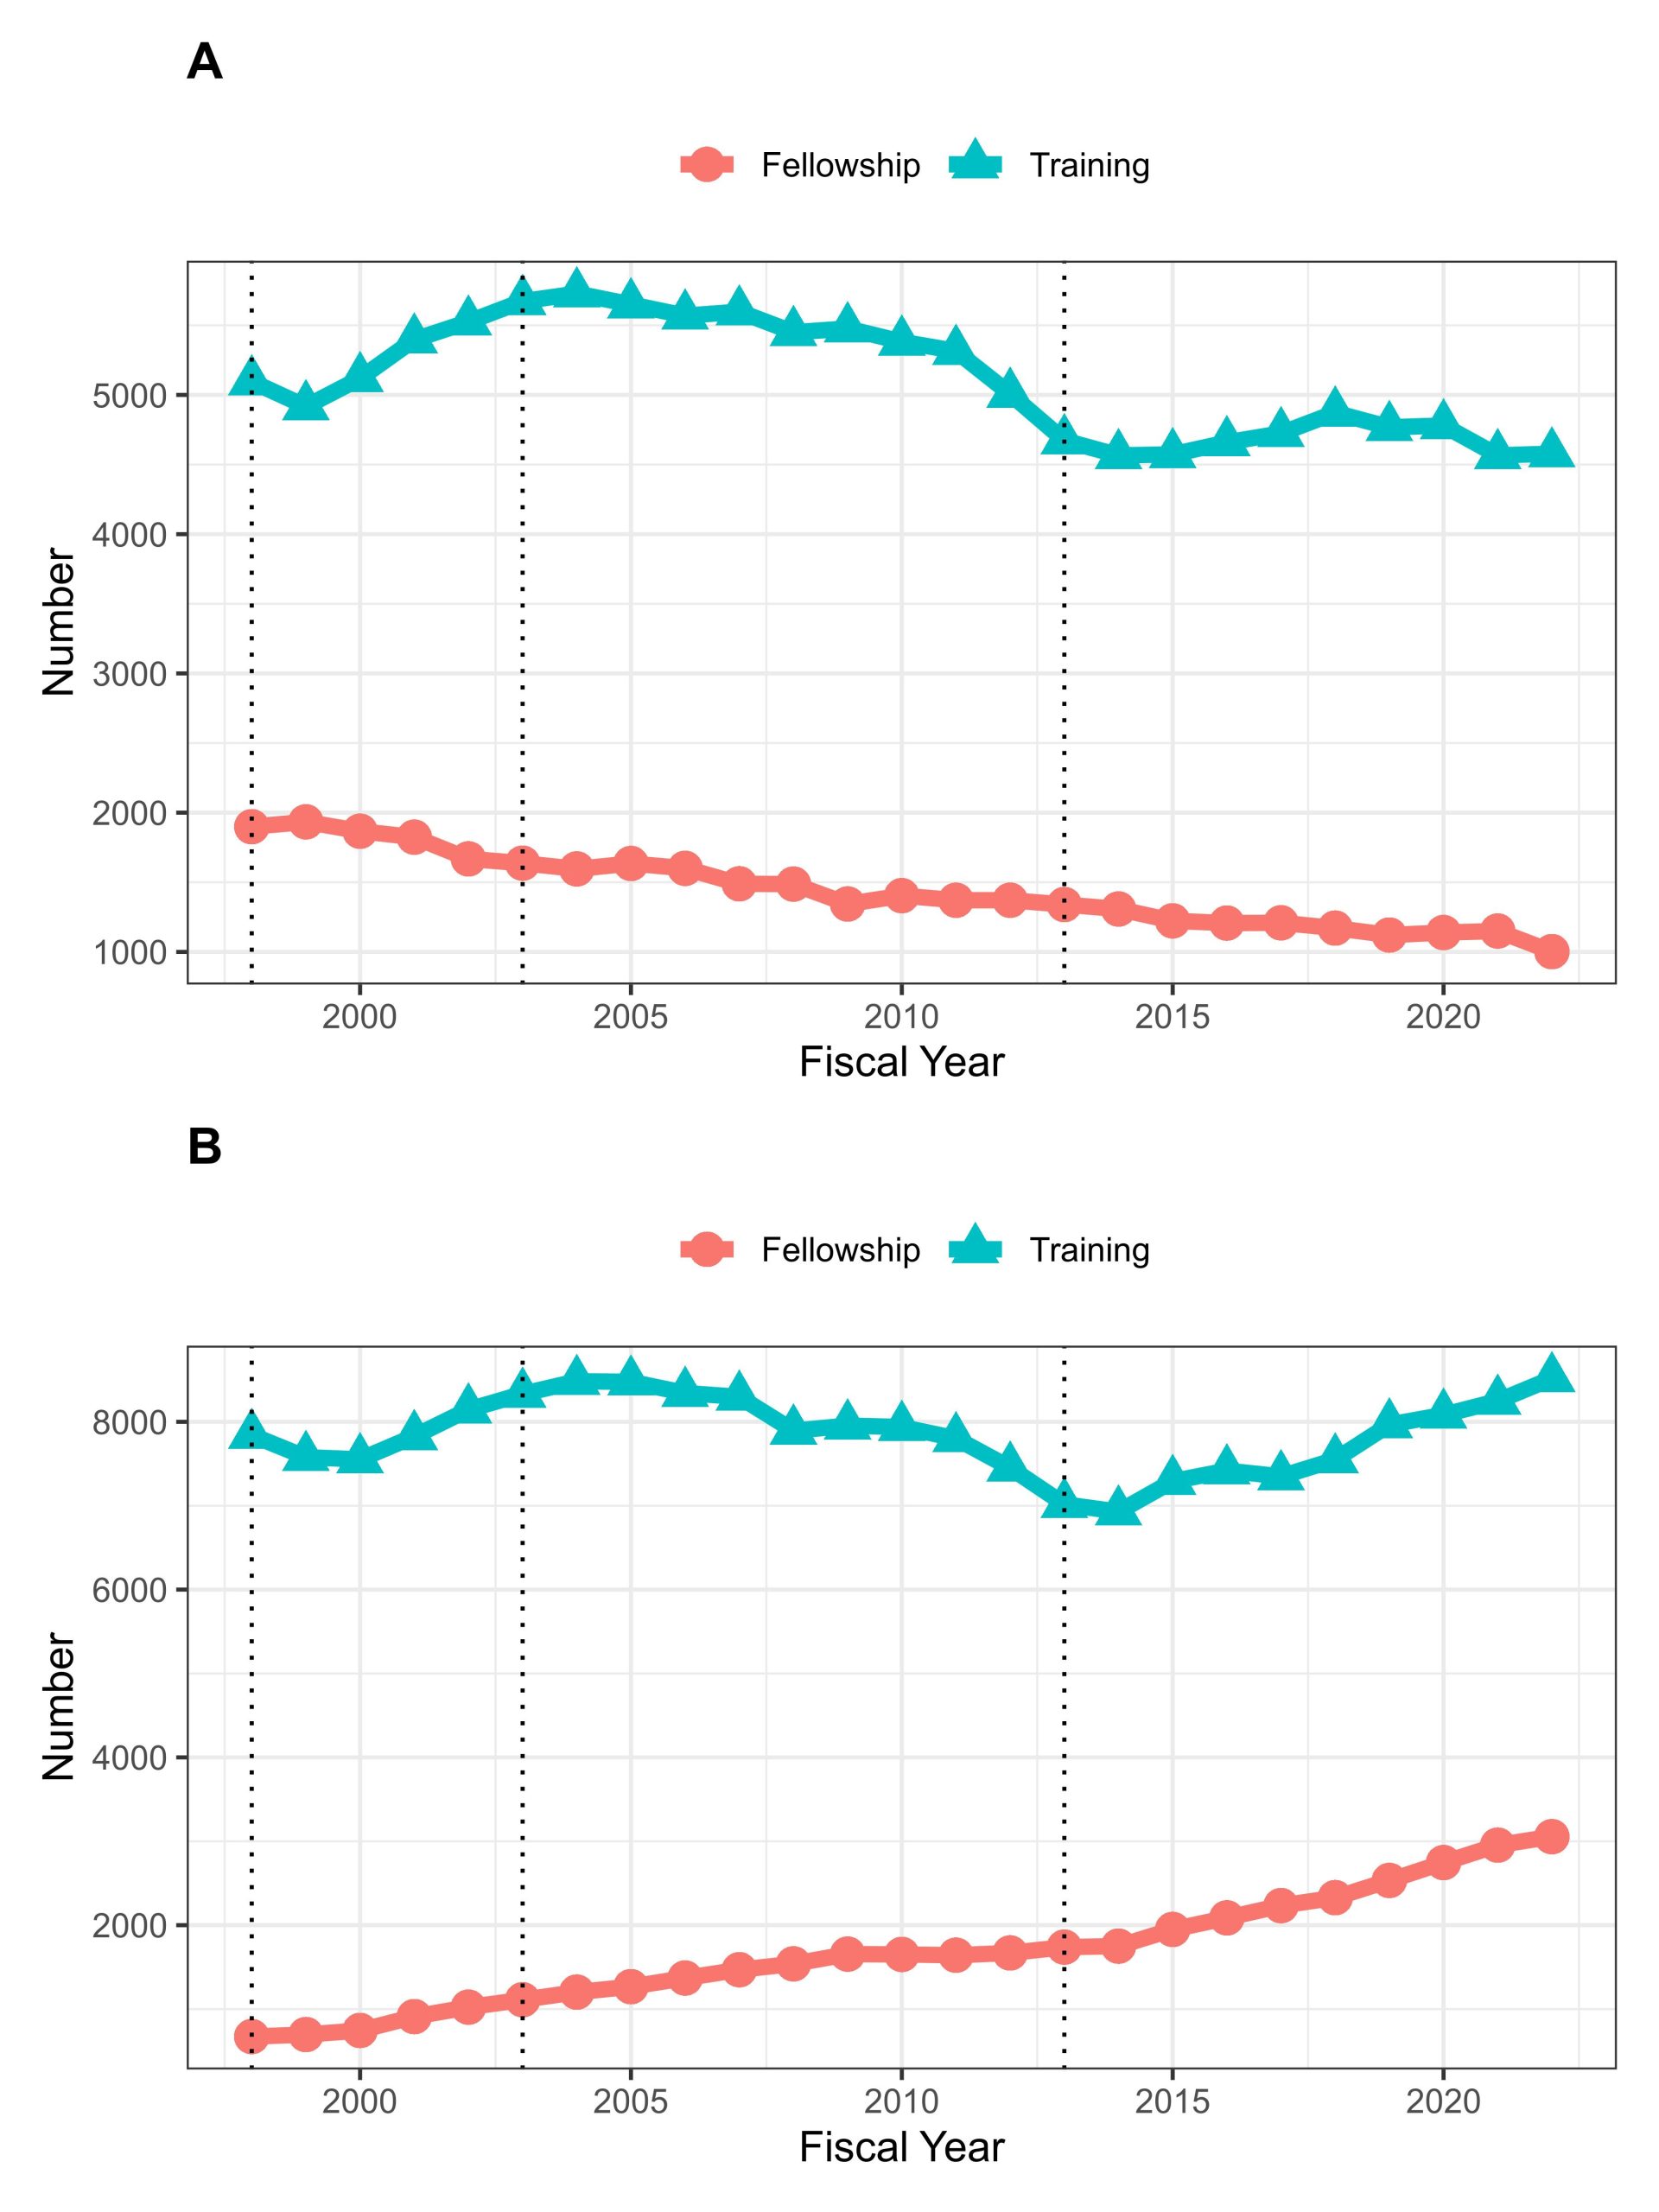 two panels of line graphs: first one shows number on the y axis from 1000 to 5000 and x axis of FIscal Year 2000-2020 with fellowships shown in line wirh red circles, and training shown in blue triangles. both seem to trend slightly downward in recent years. Panel B refers to predoctoral students, seeming to trend upward.